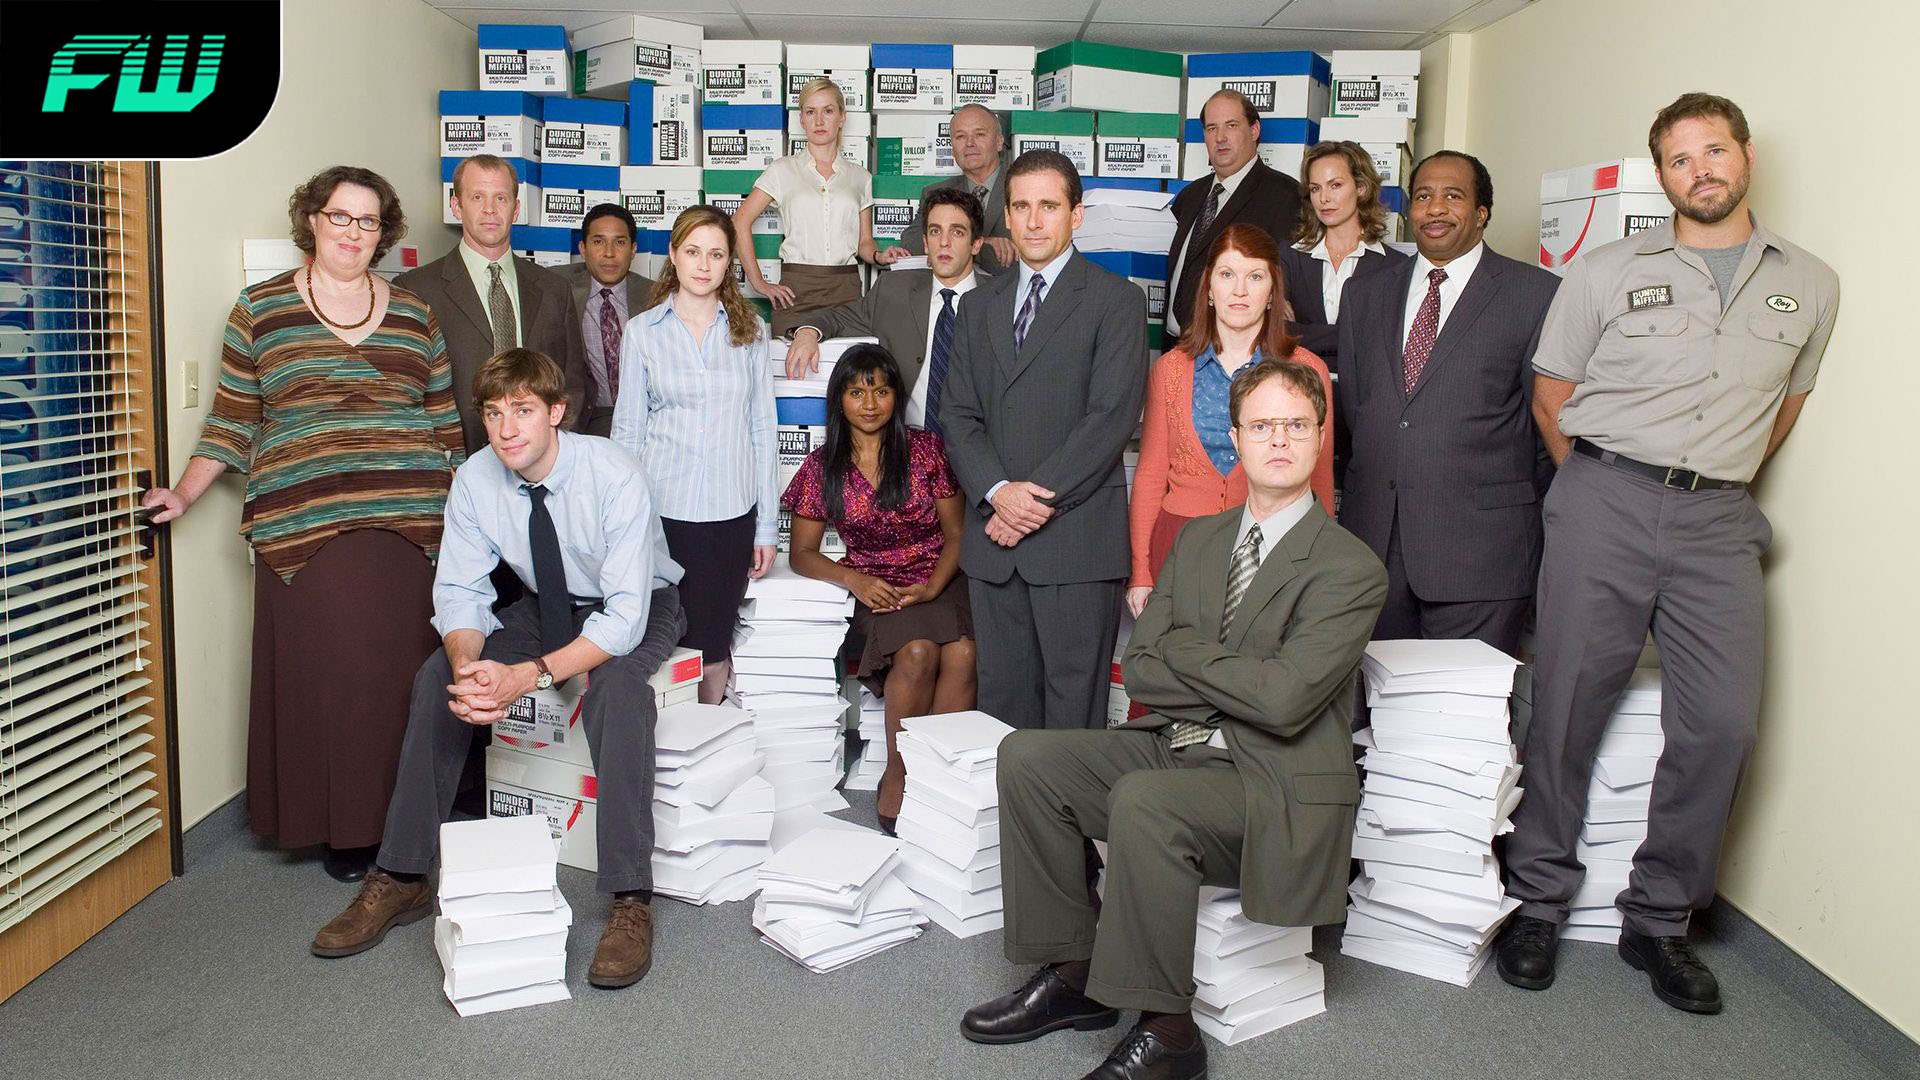 Top 10 Episodes Of The Office, Ranked!